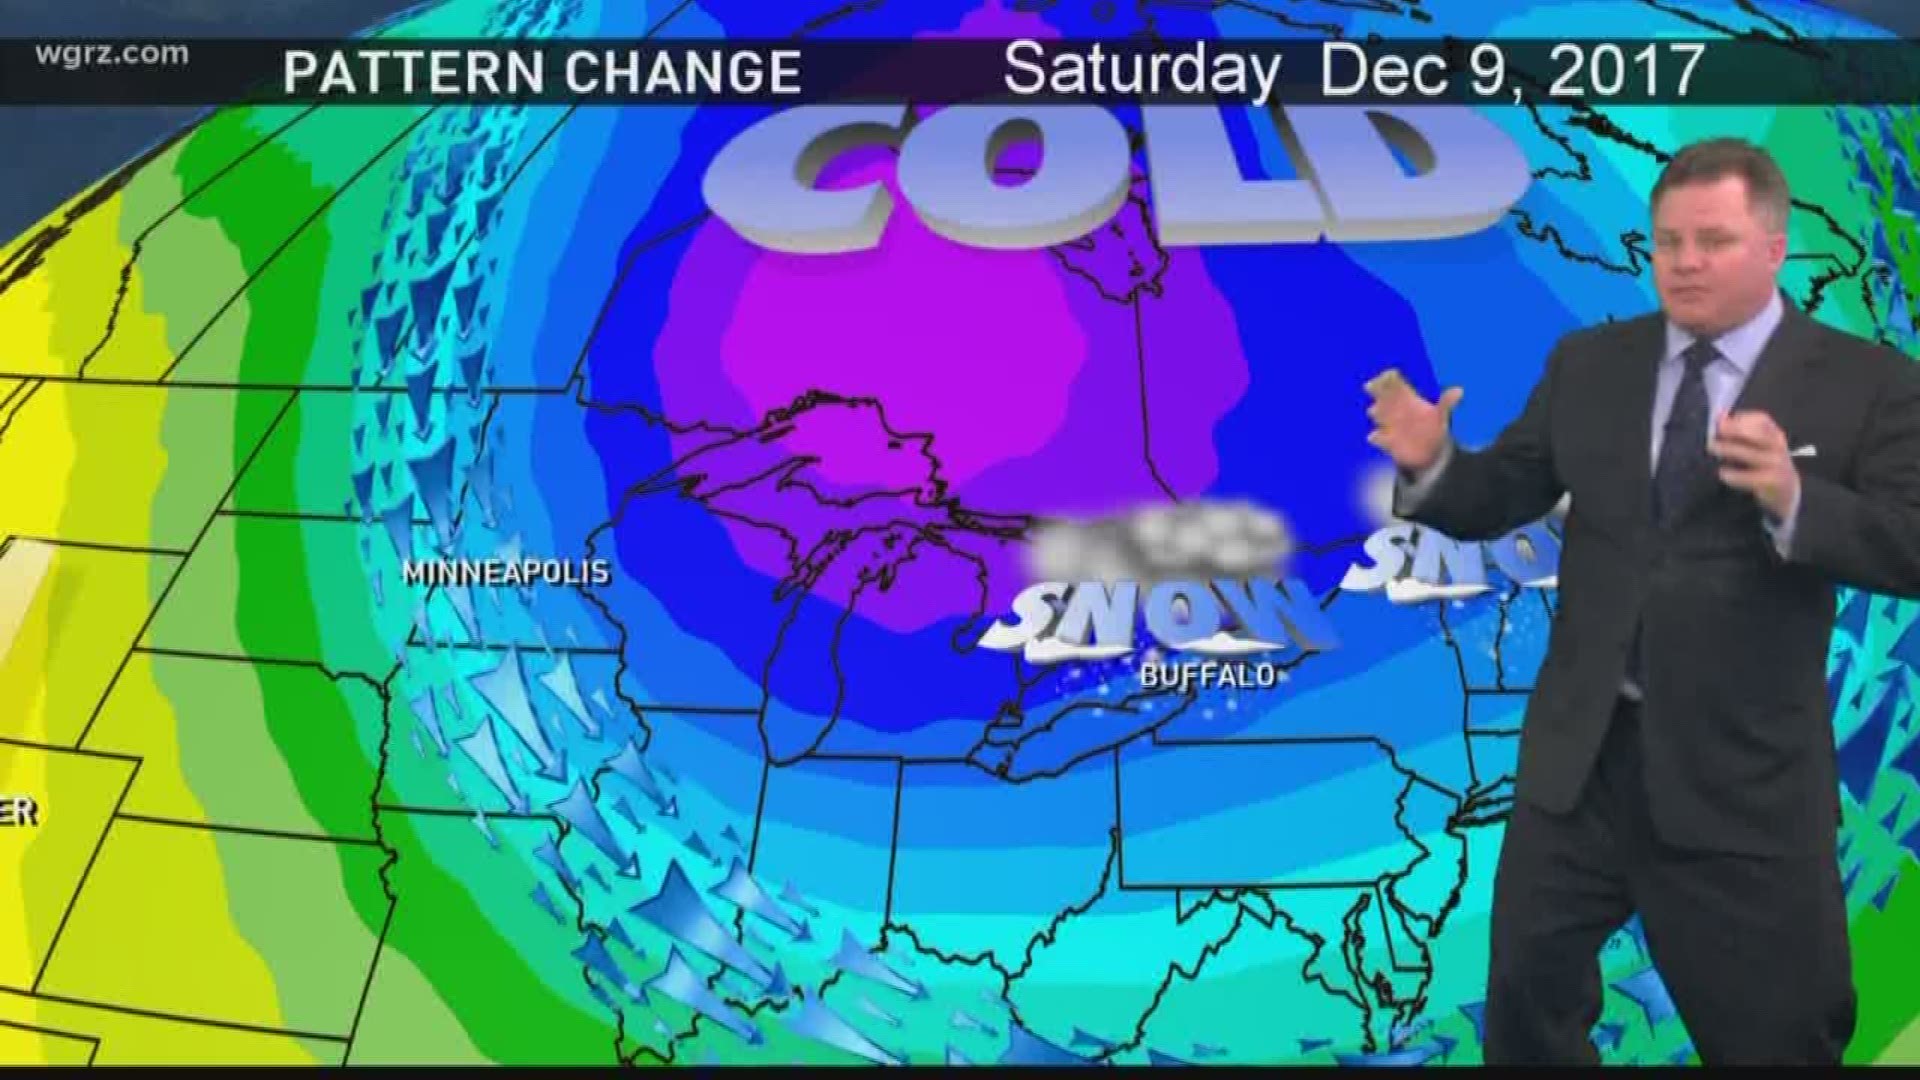 Lake effect snow may come in with arctic chill